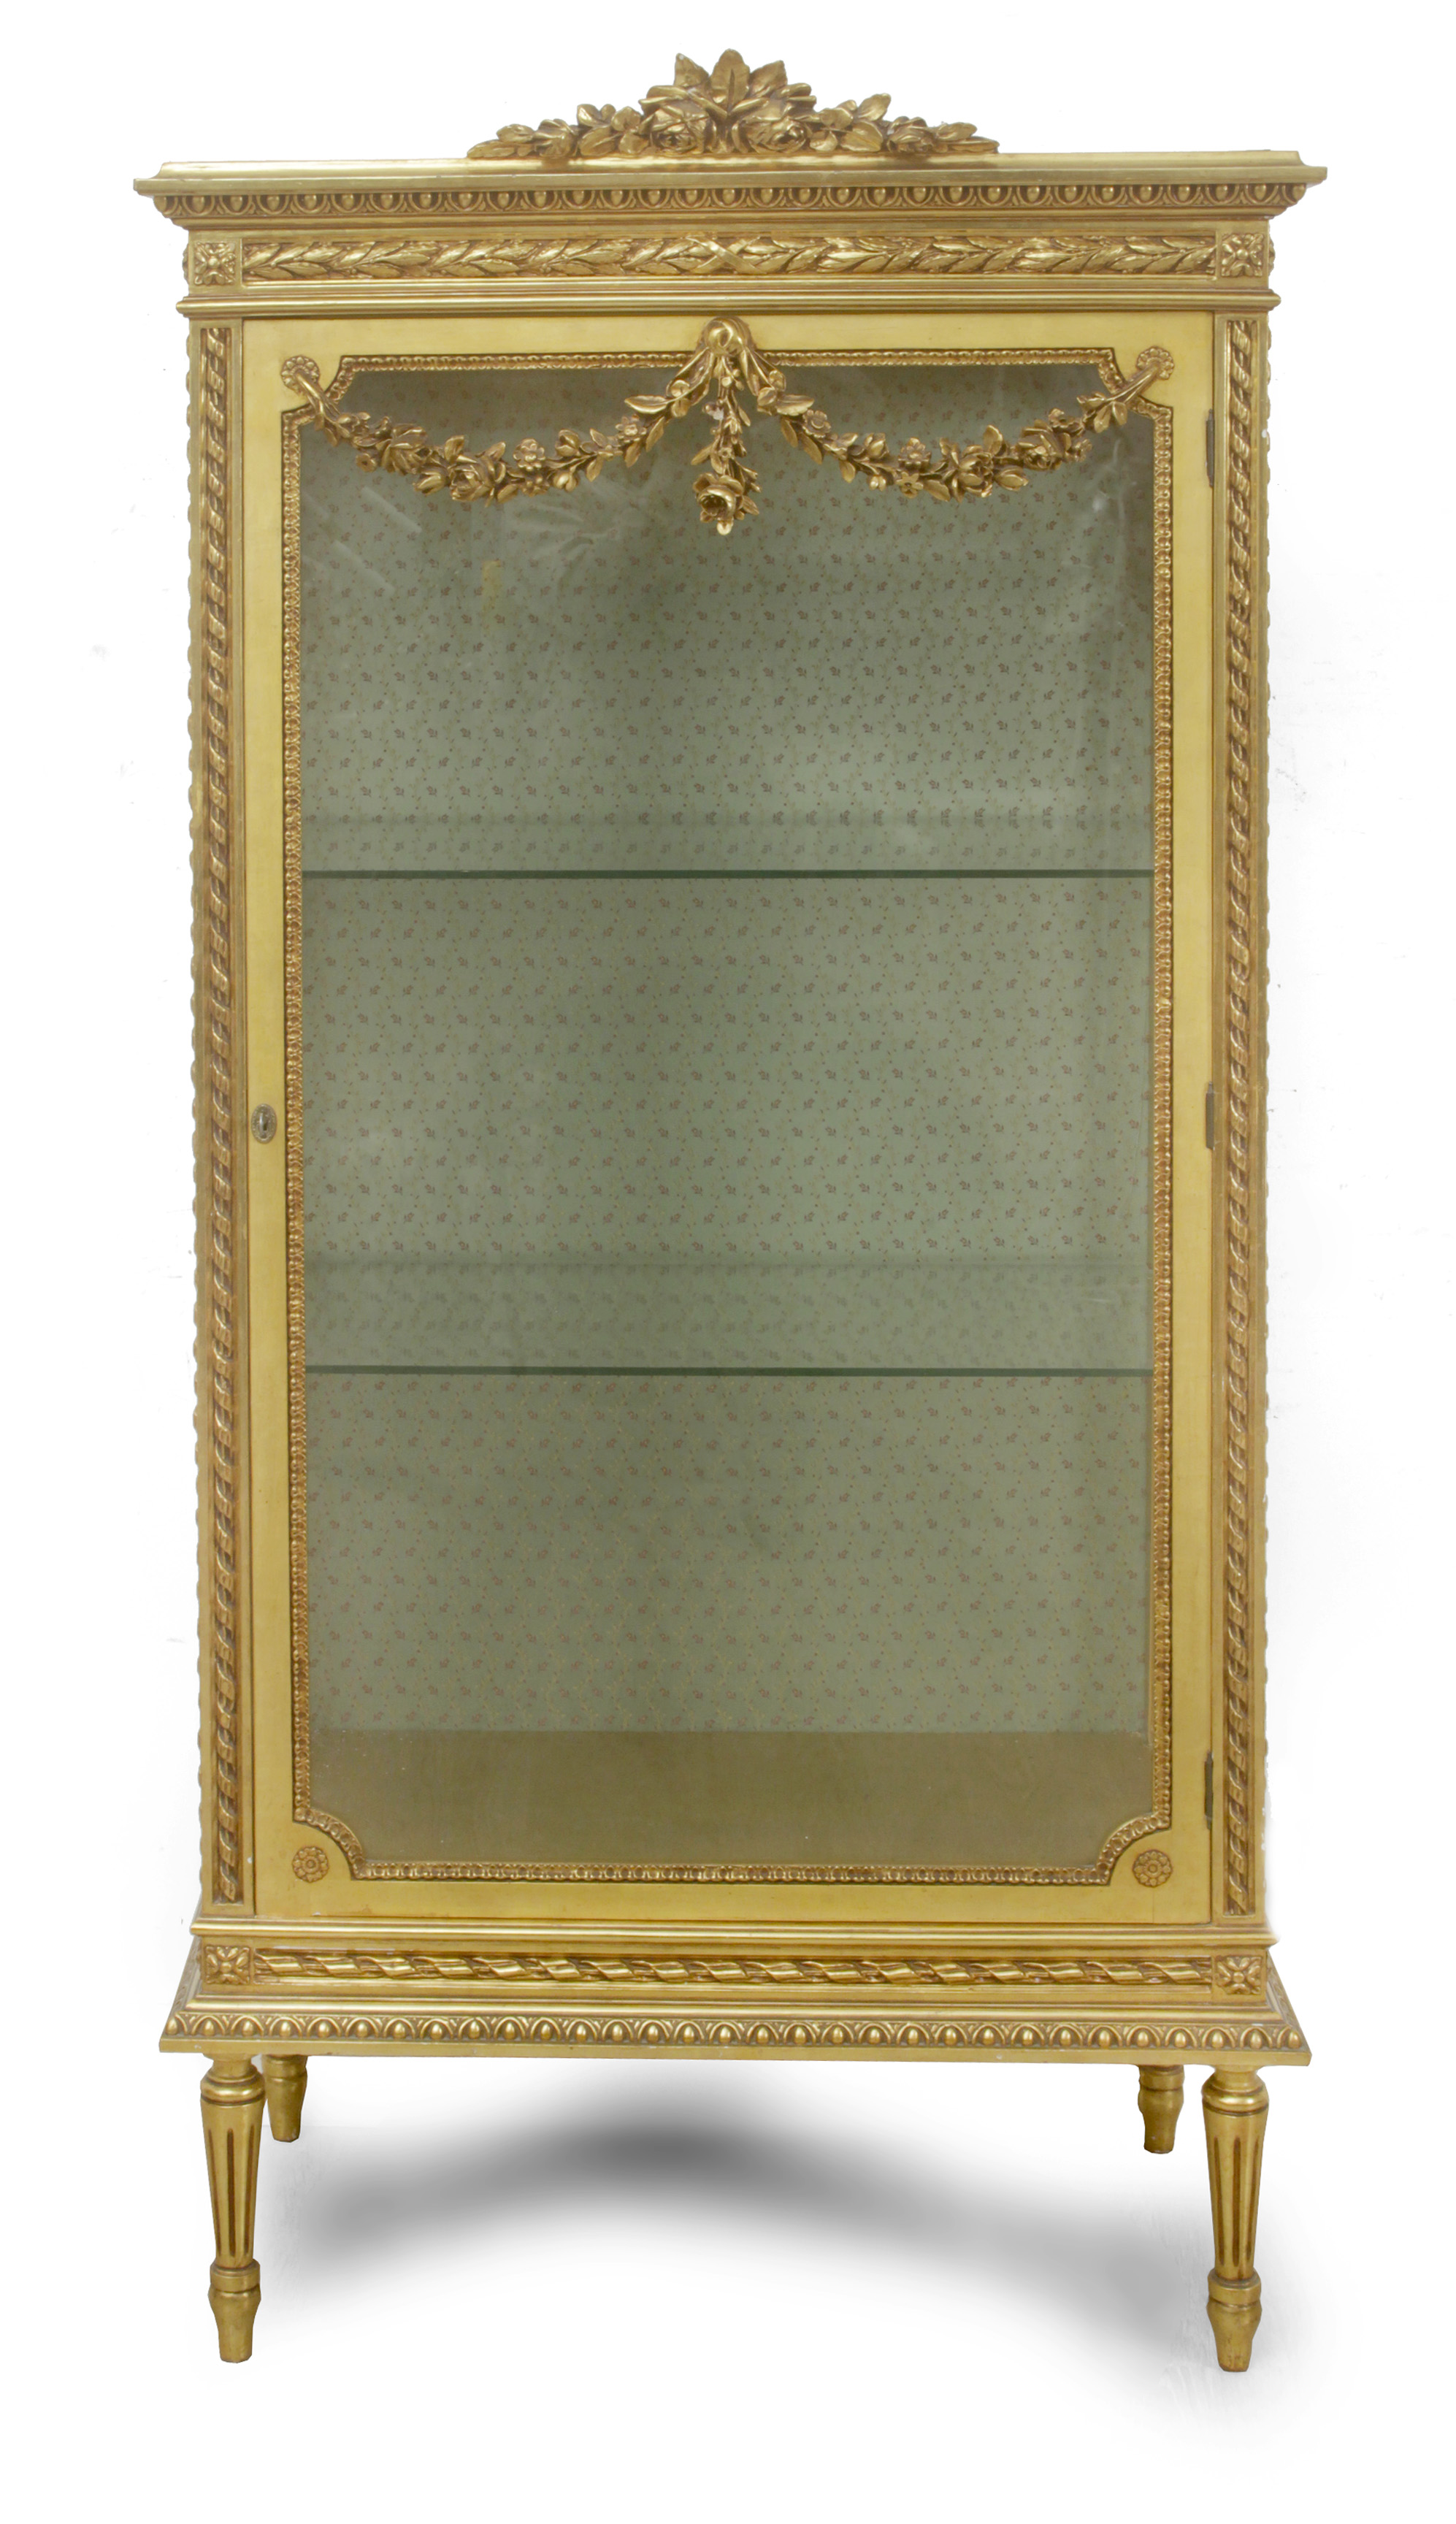 A 20th century Louis XVI style glass cabinet